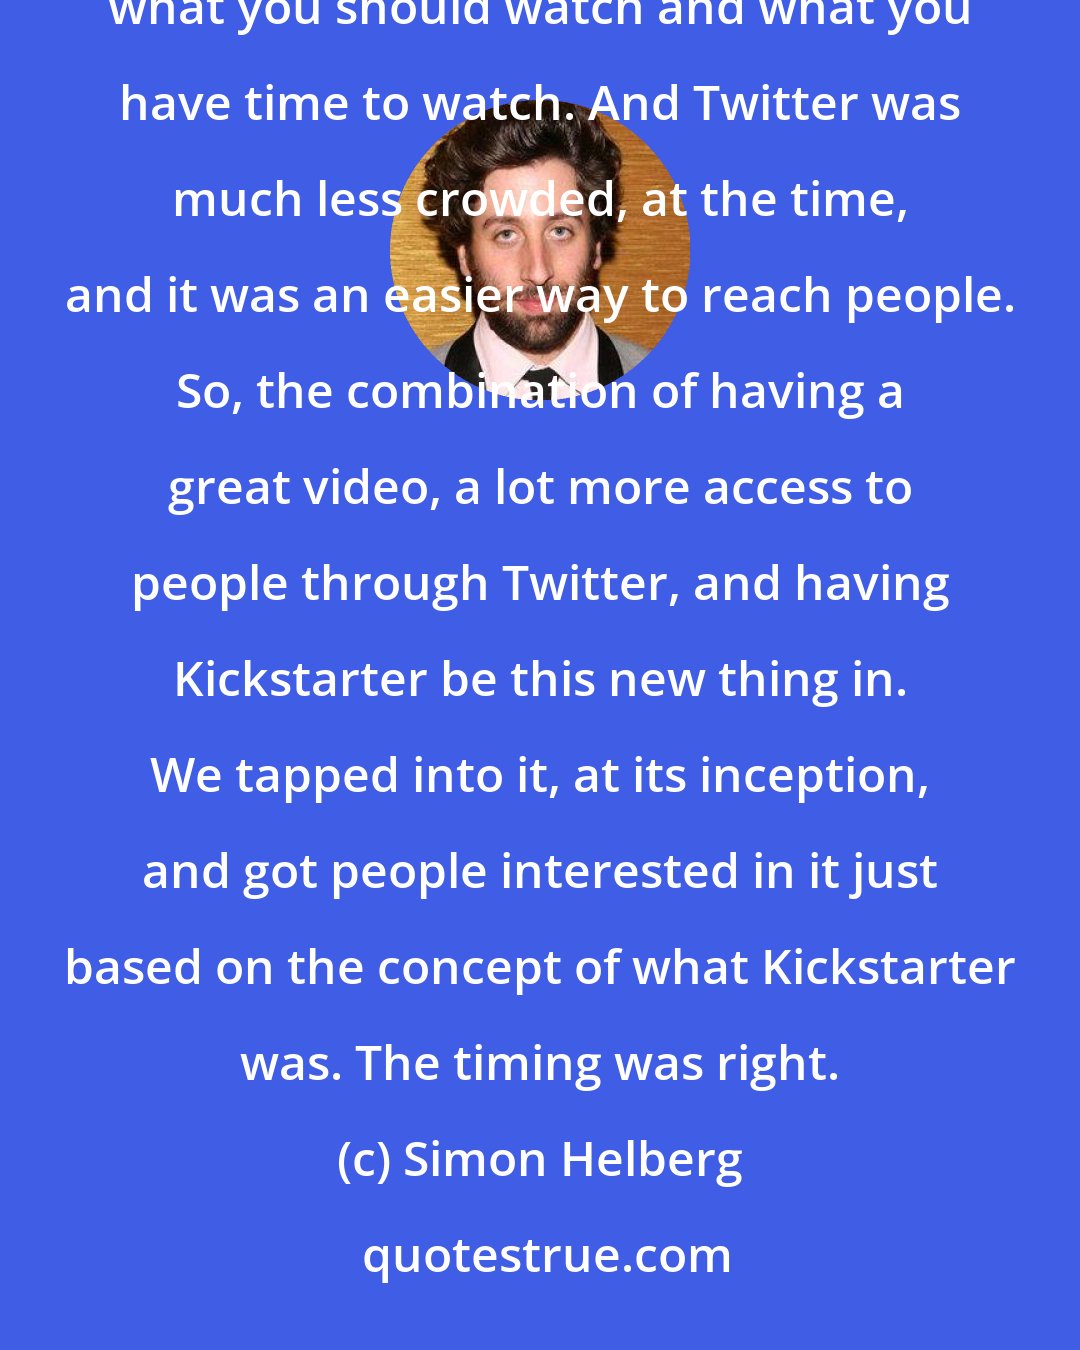 Simon Helberg: Everybody has something now. It's become very over-saturated, and it's hard to weed out what's good, what you should watch and what you have time to watch. And Twitter was much less crowded, at the time, and it was an easier way to reach people. So, the combination of having a great video, a lot more access to people through Twitter, and having Kickstarter be this new thing in. We tapped into it, at its inception, and got people interested in it just based on the concept of what Kickstarter was. The timing was right.